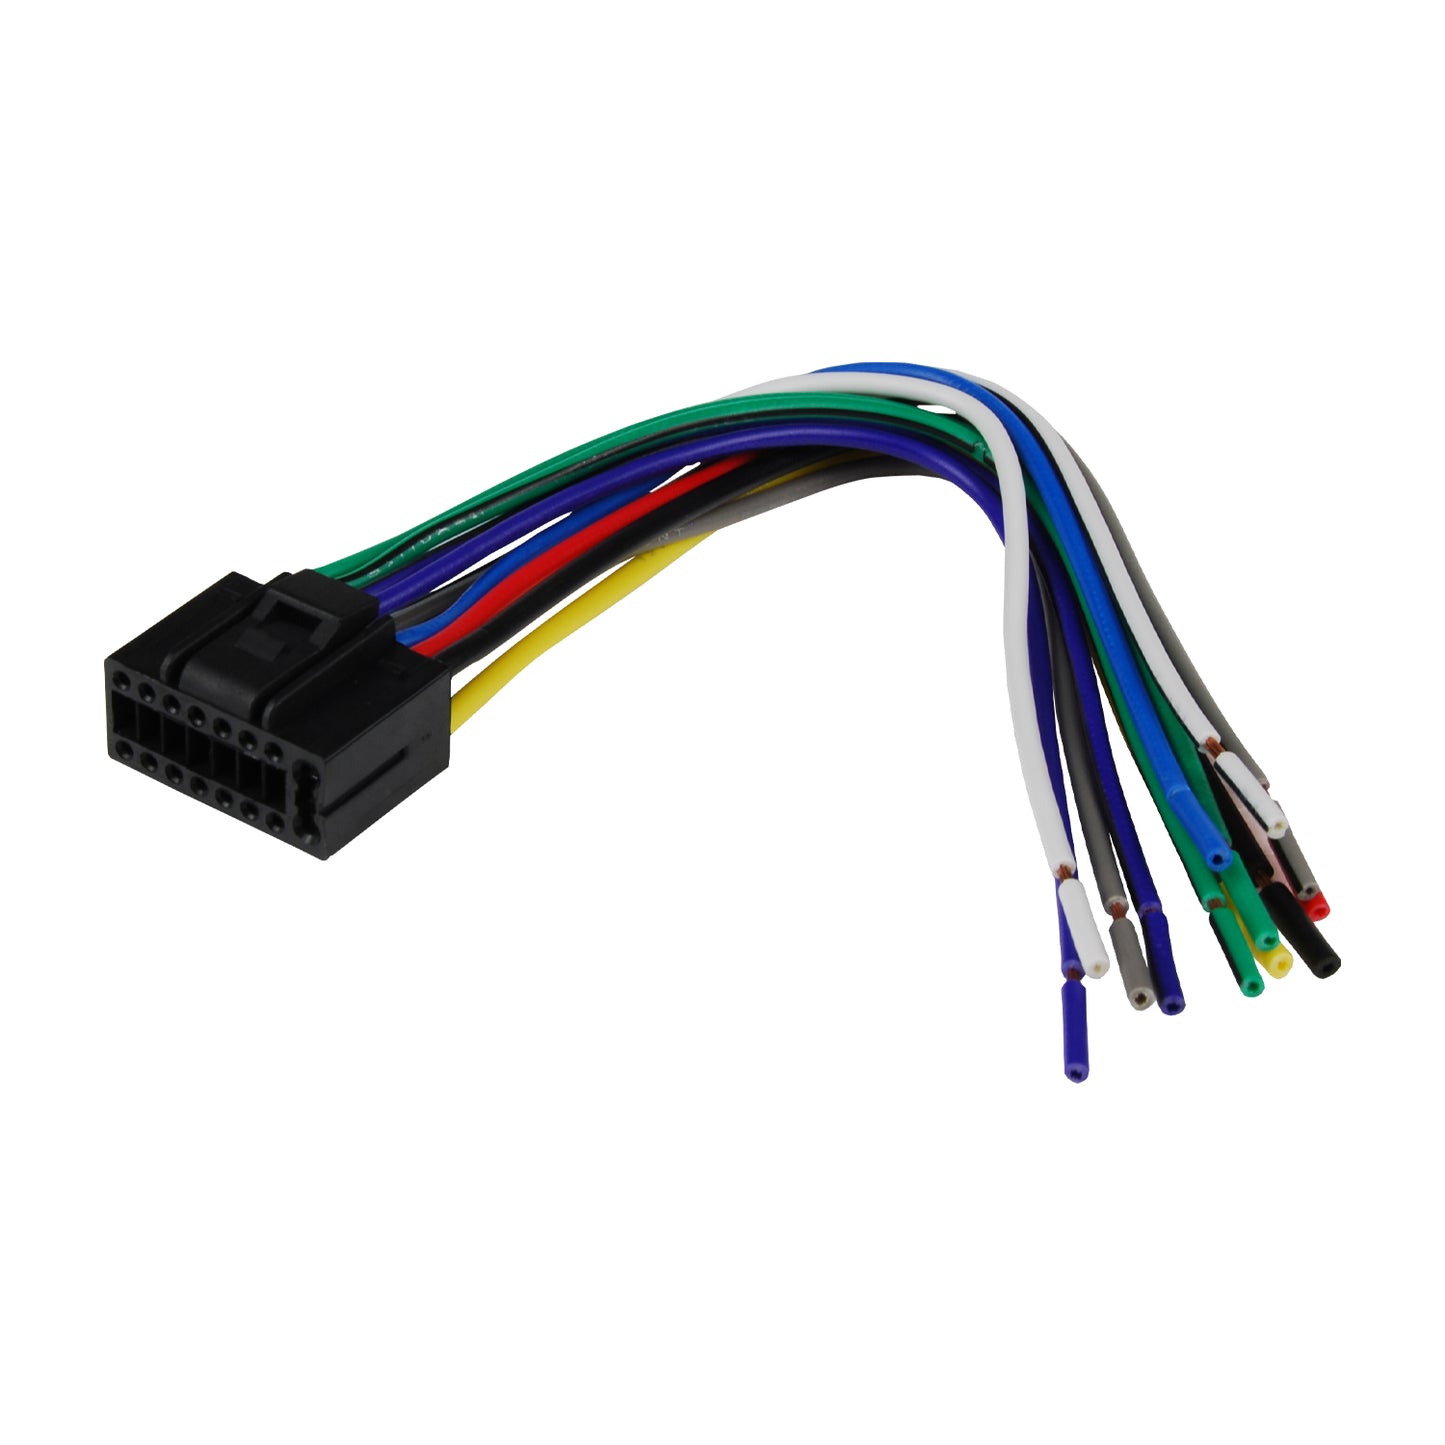 WH-JVC09 - Wiring Harness for JVC Models